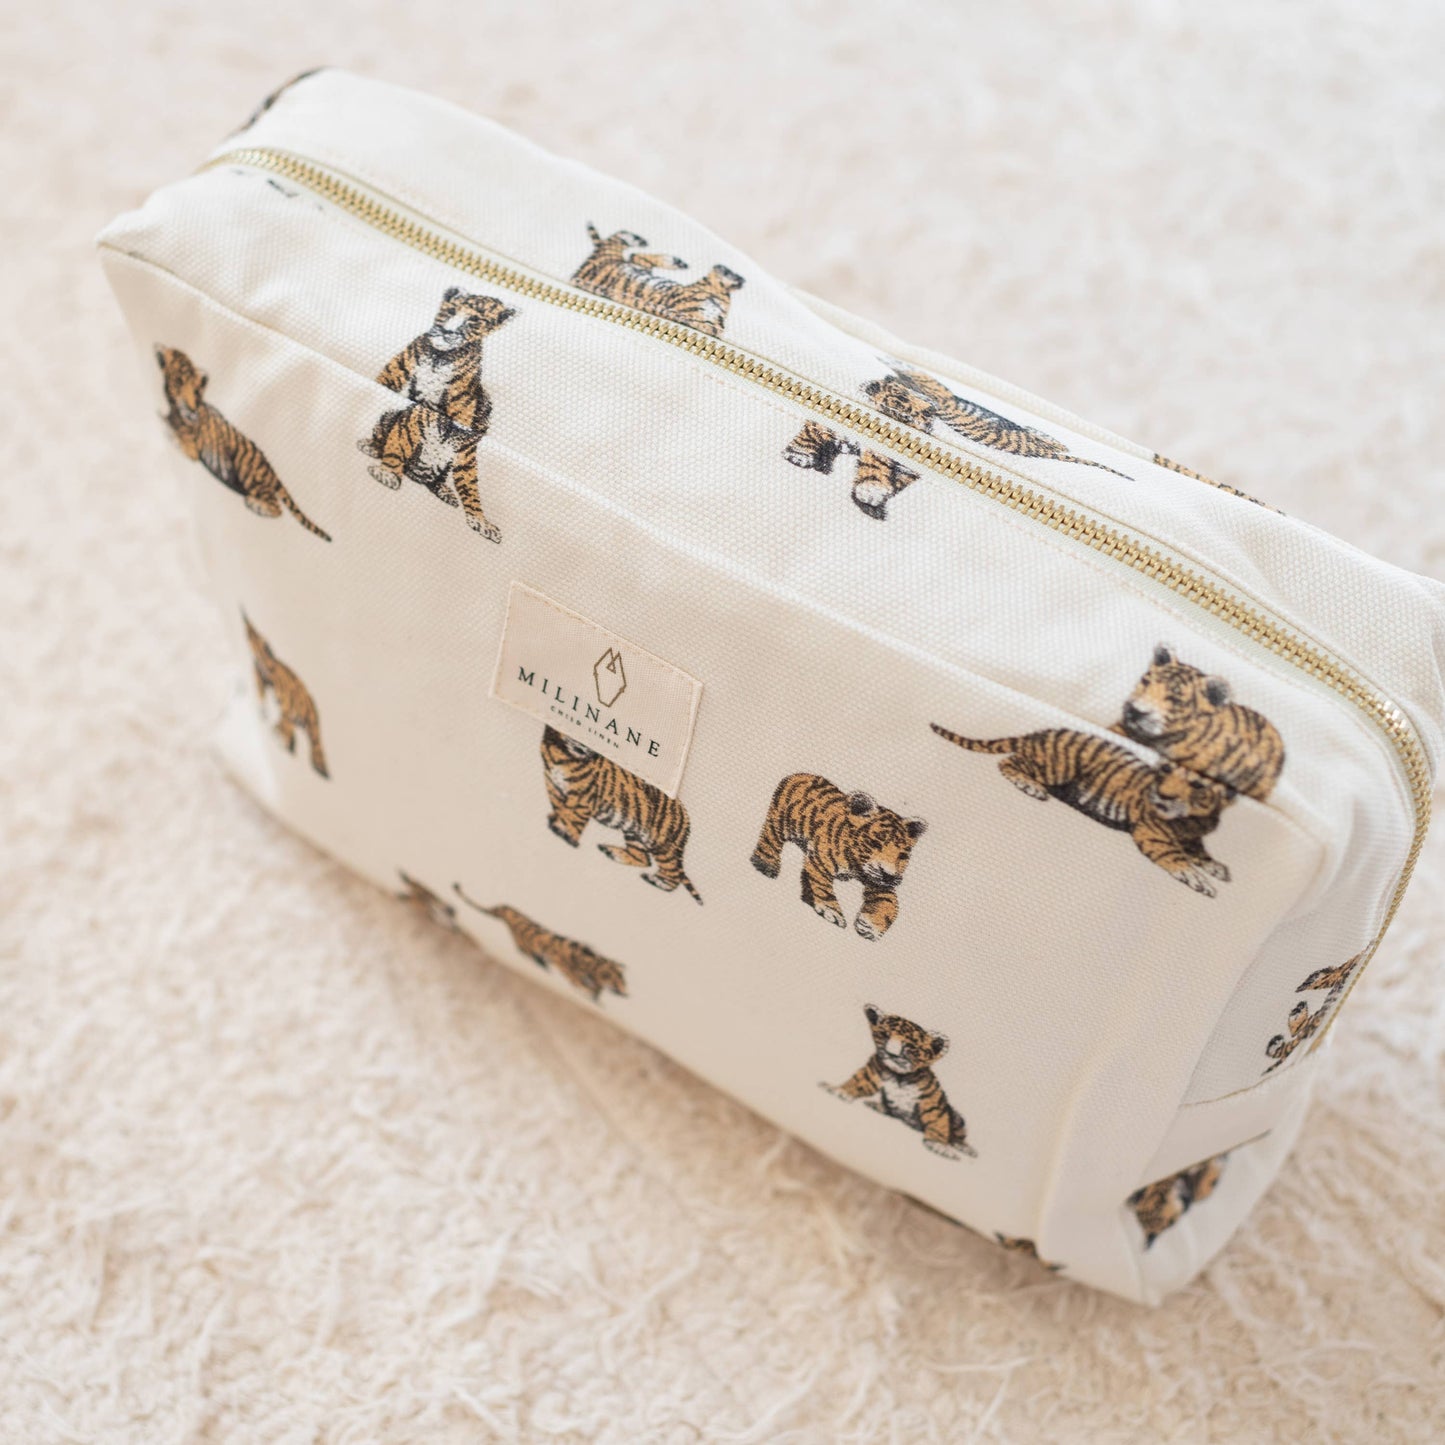 Thelma the Tiger - large vanity case